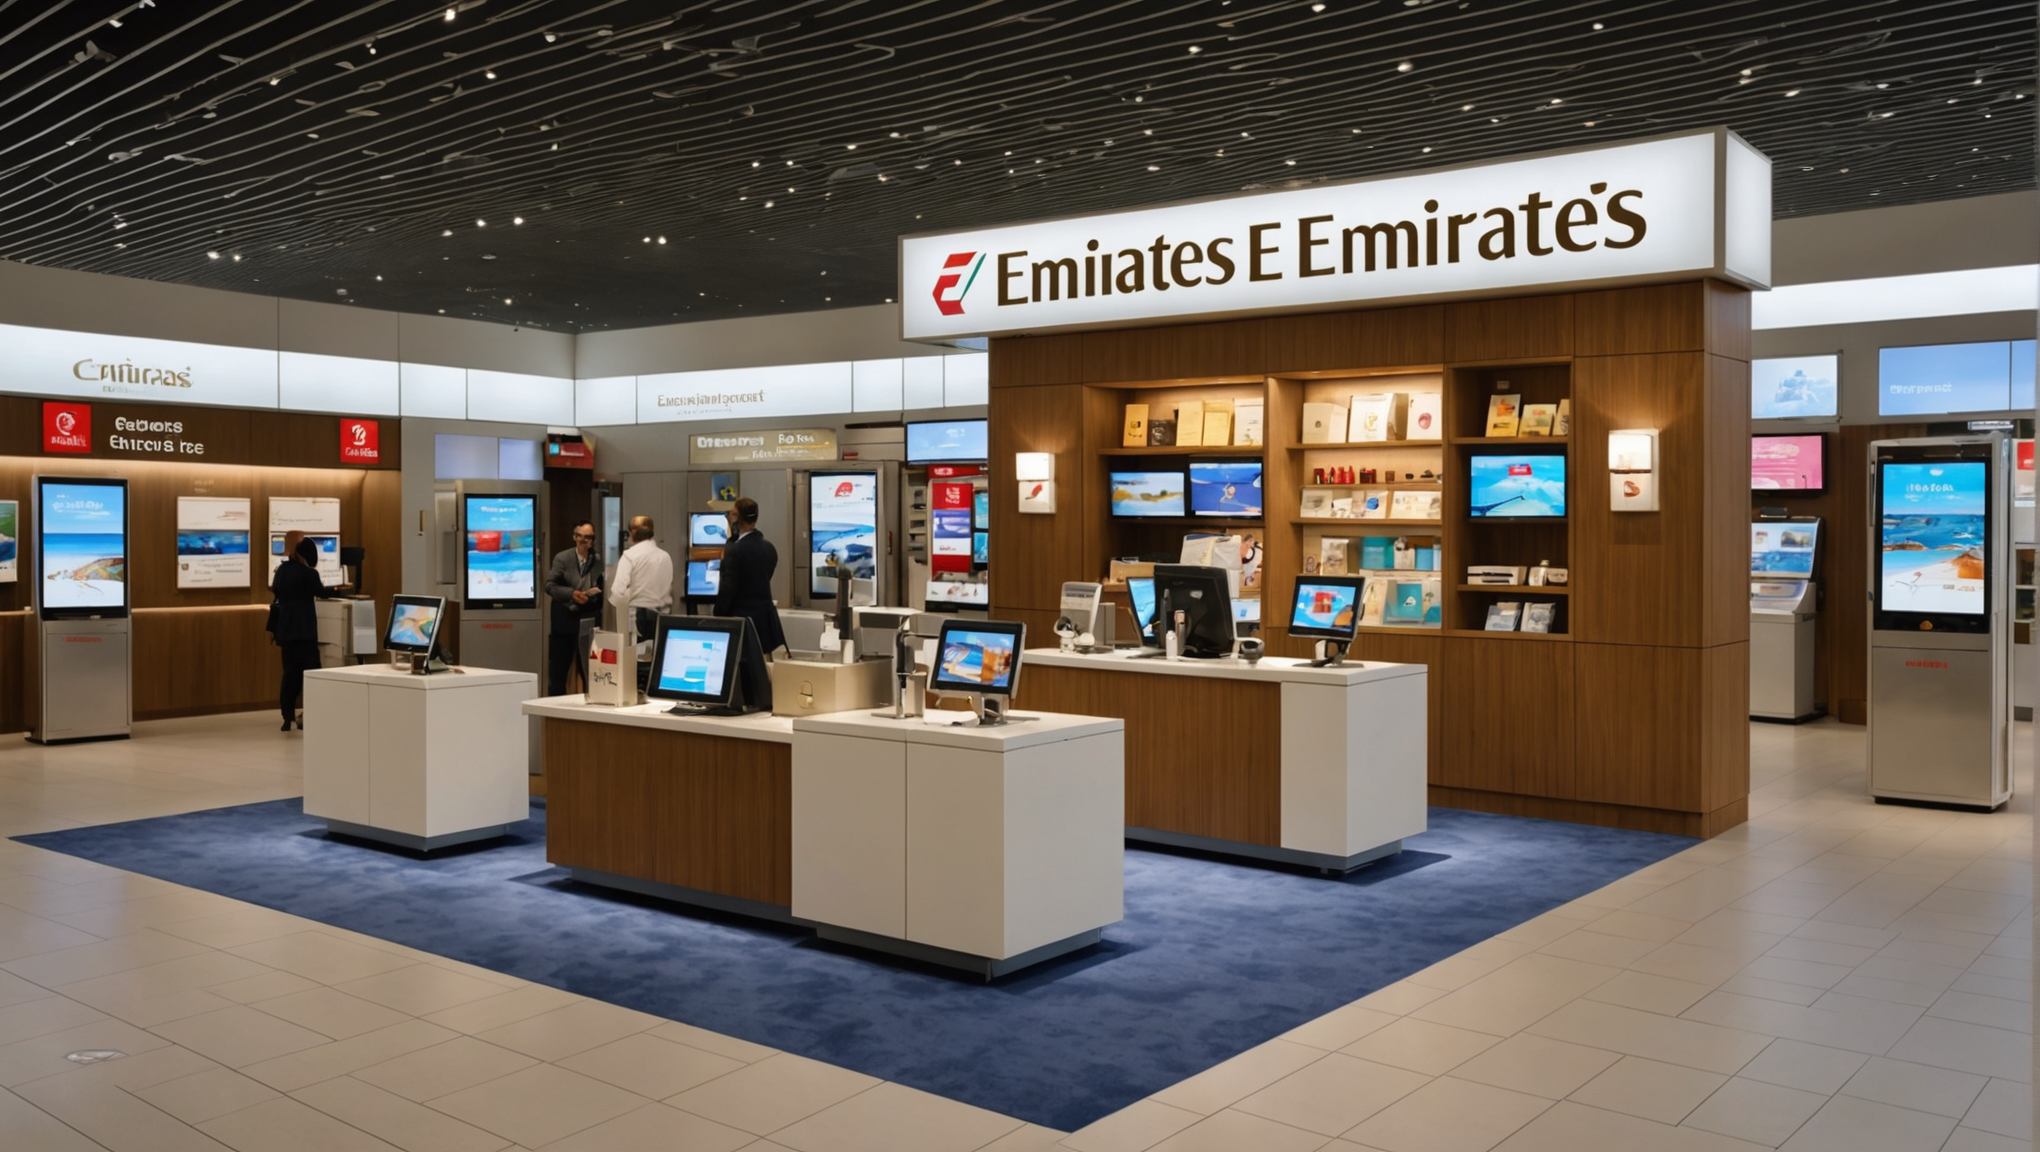 discover emirates' inauguration of an exclusive new relaxation area at paris roissy-cdg airport, for absolute comfort before your flight.